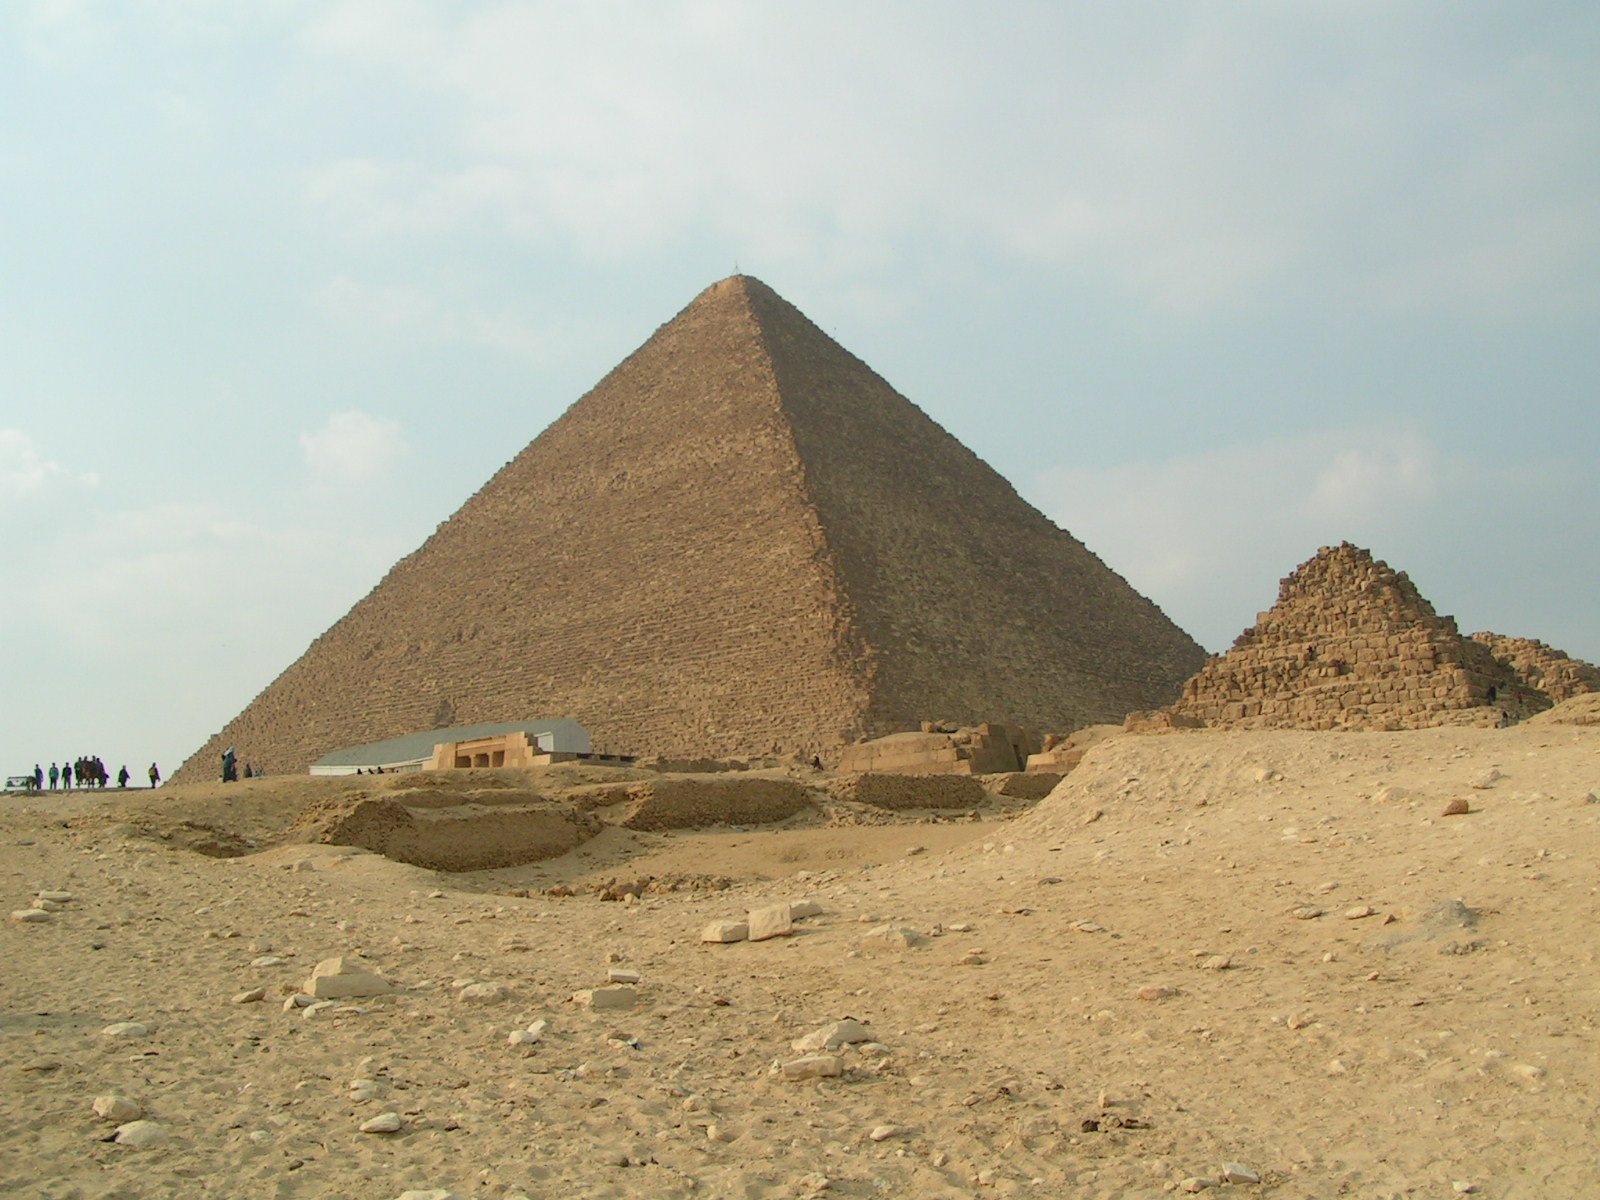 the great pyramid of giza, as seen from a small mound